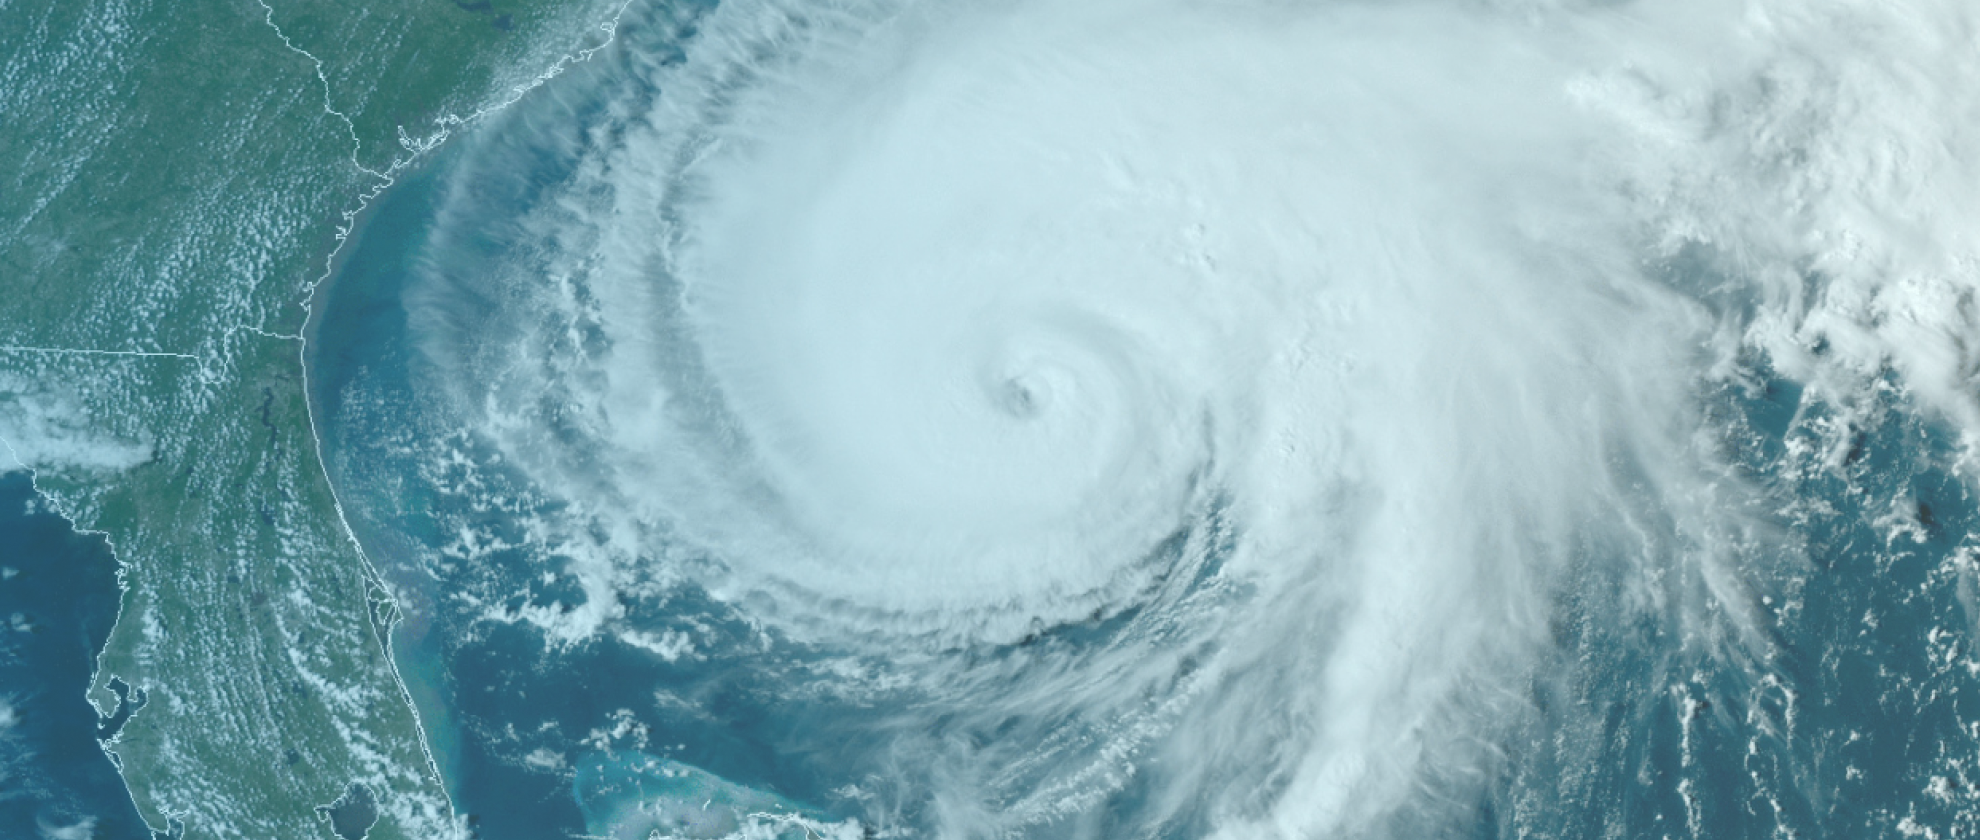 Screen capture of a news report showing a satellite view of a hurricane